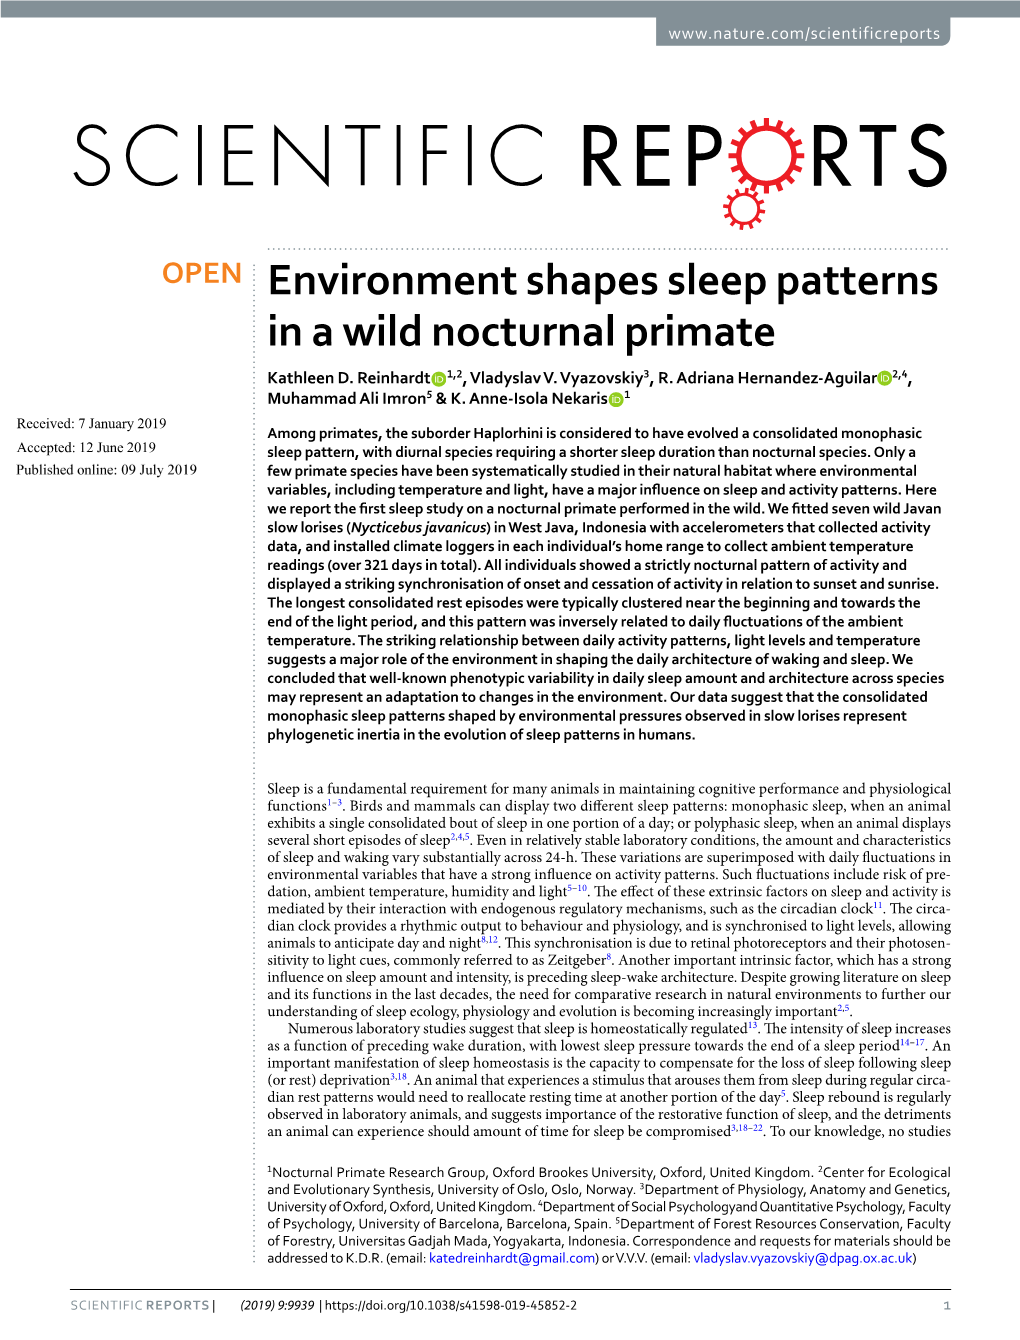 Environment Shapes Sleep Patterns in a Wild Nocturnal Primate Kathleen D